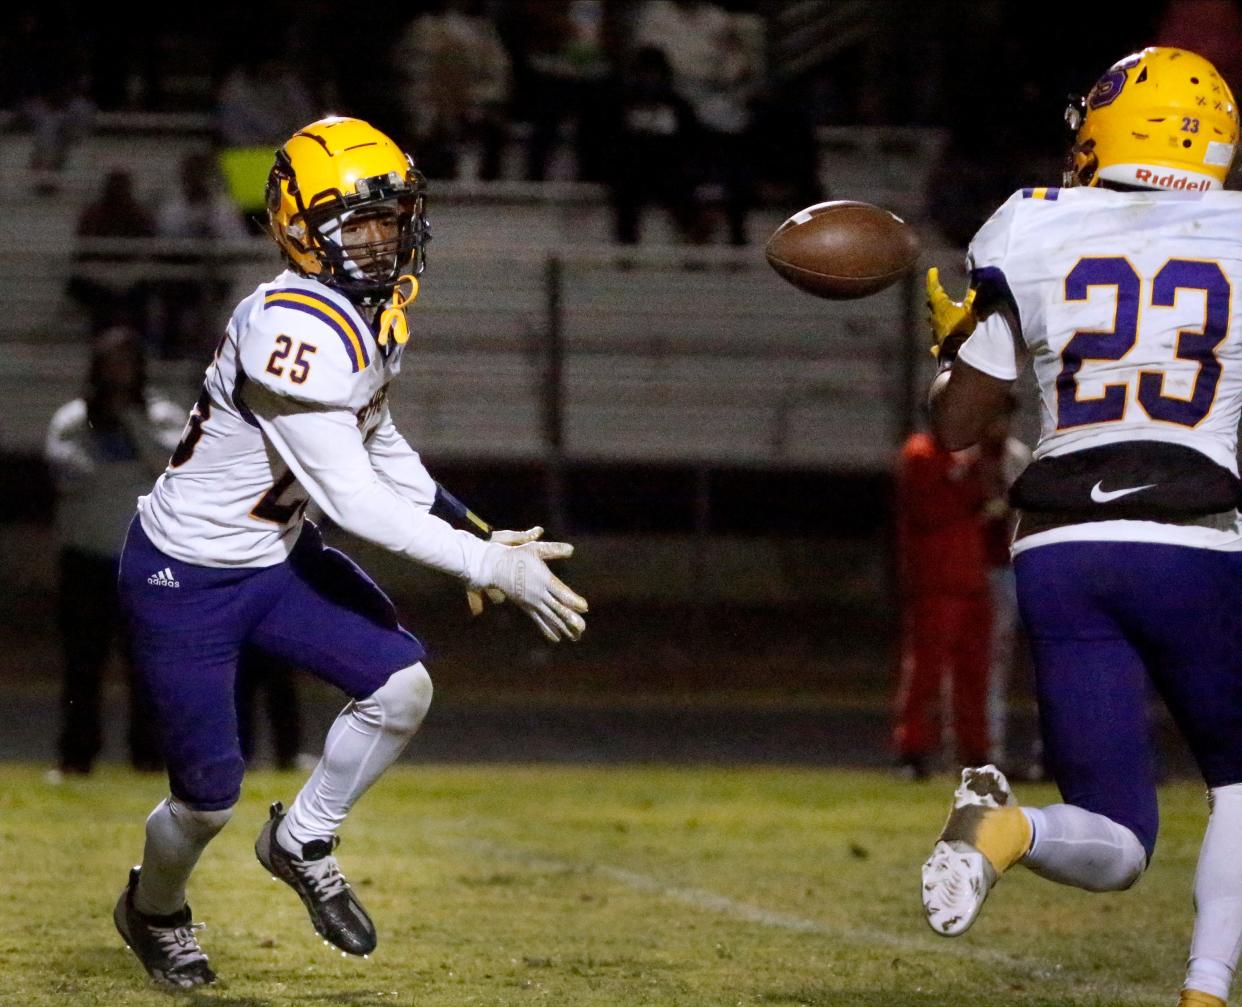 Smyrna's Michael Robinson (25) tosses the ball to Smyrna's Thomas Jones (23) during the football game against Antioch as they attempt a 2-point conversion on Friday, Oct. 20, 2023, at Antioch High School.